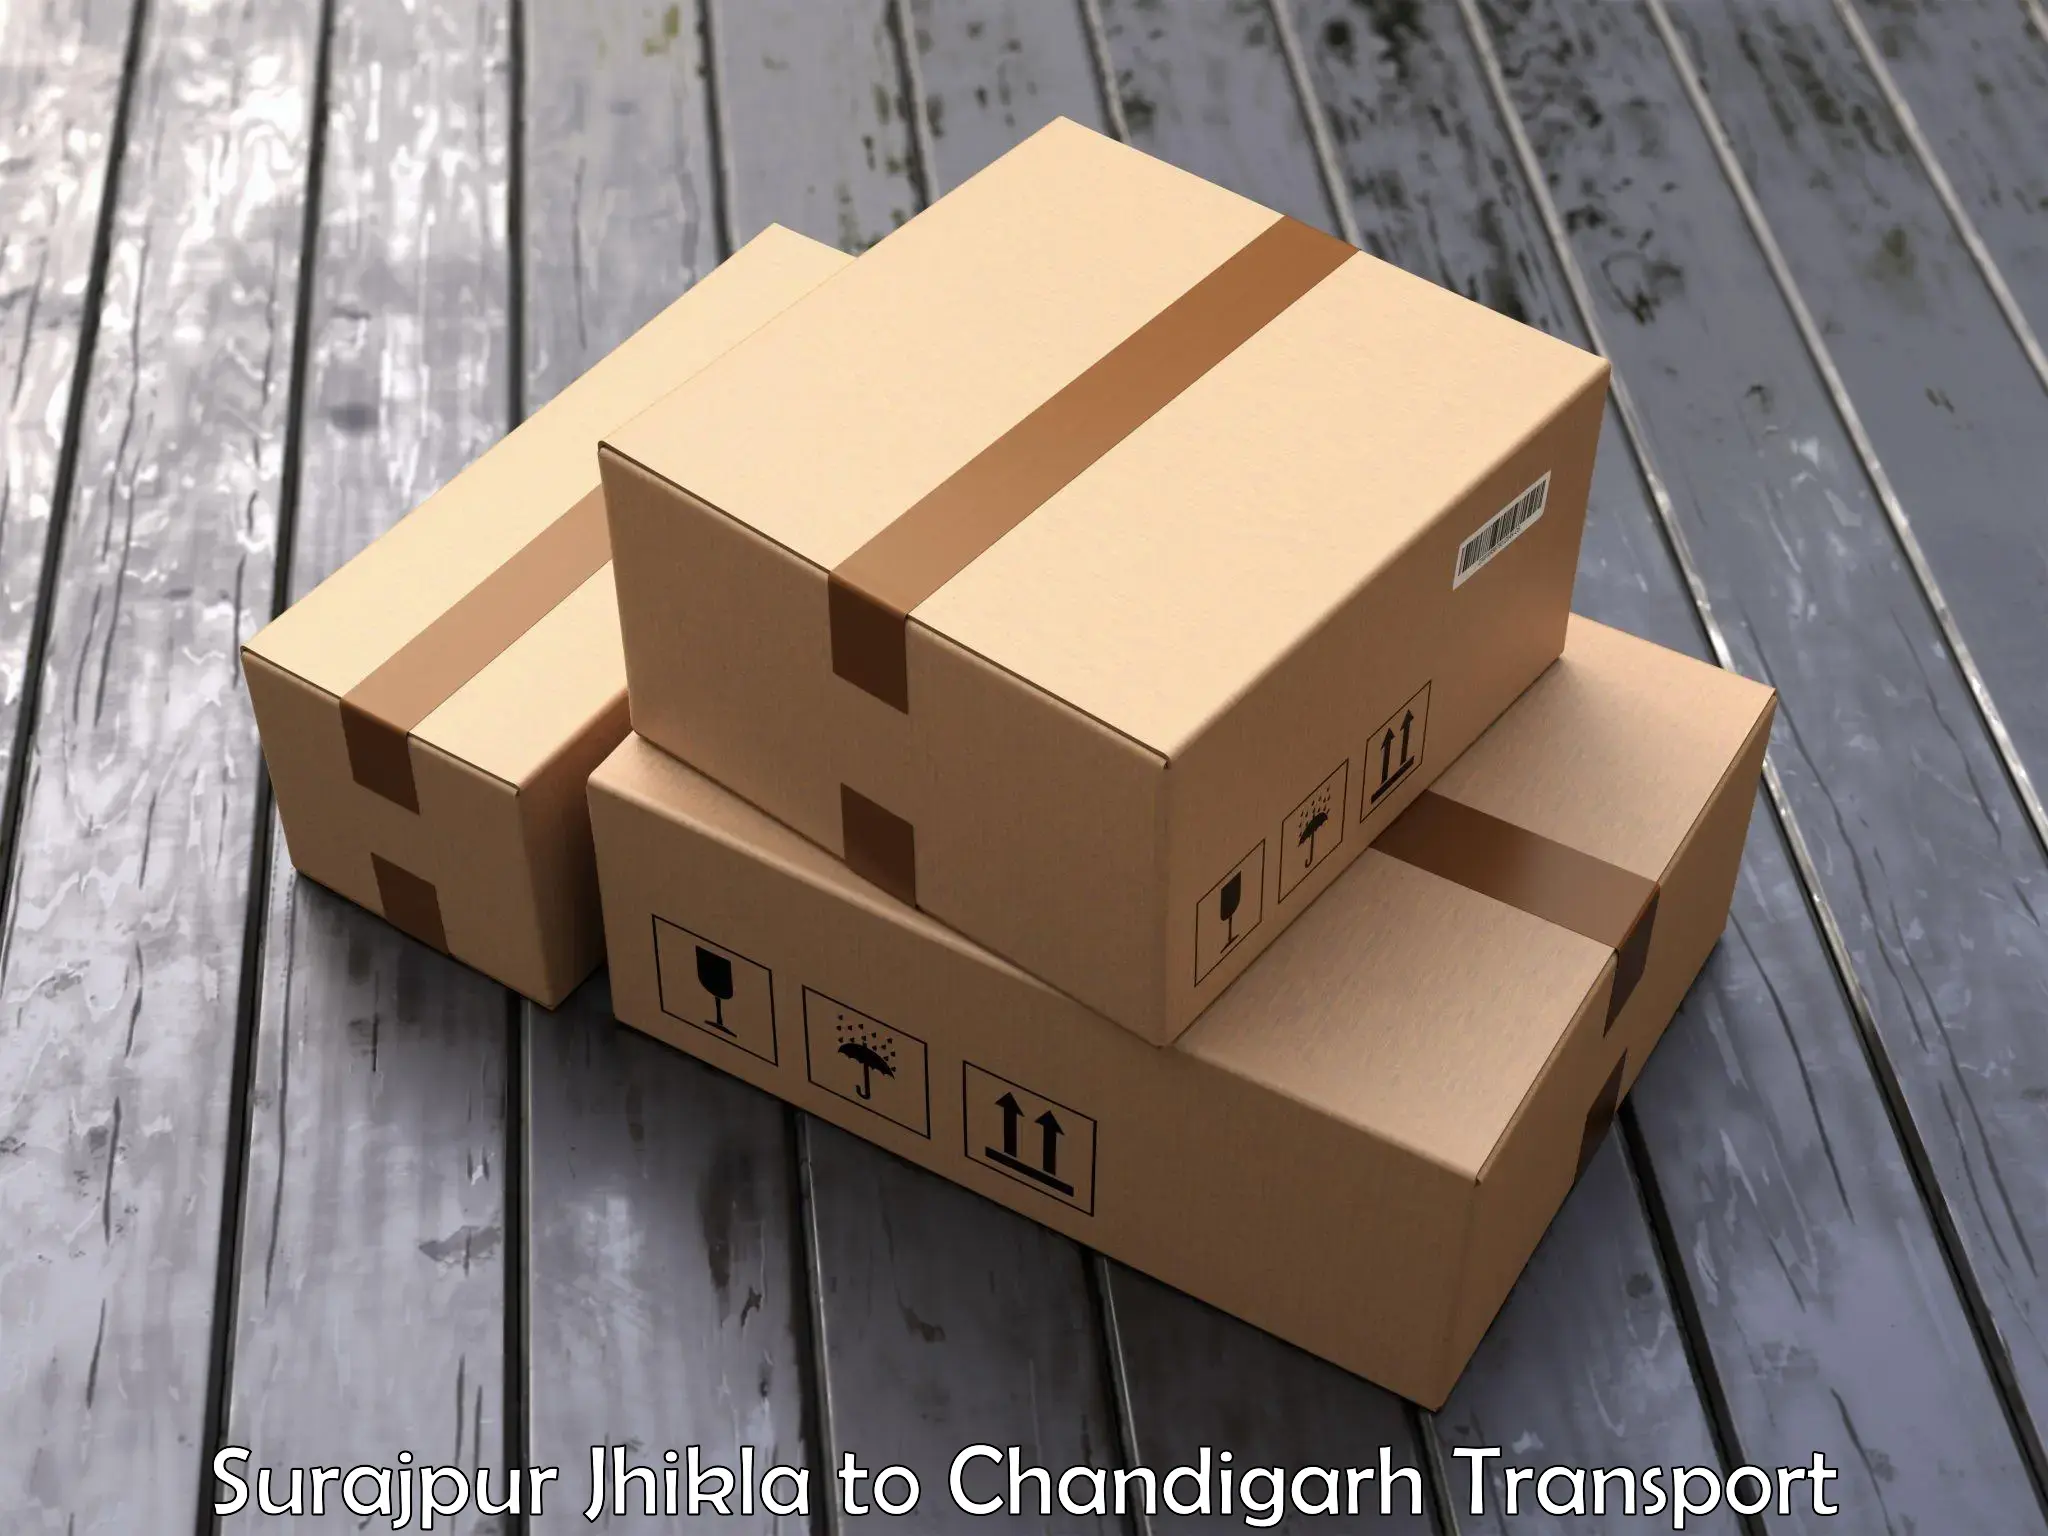 Part load transport service in India Surajpur Jhikla to Chandigarh